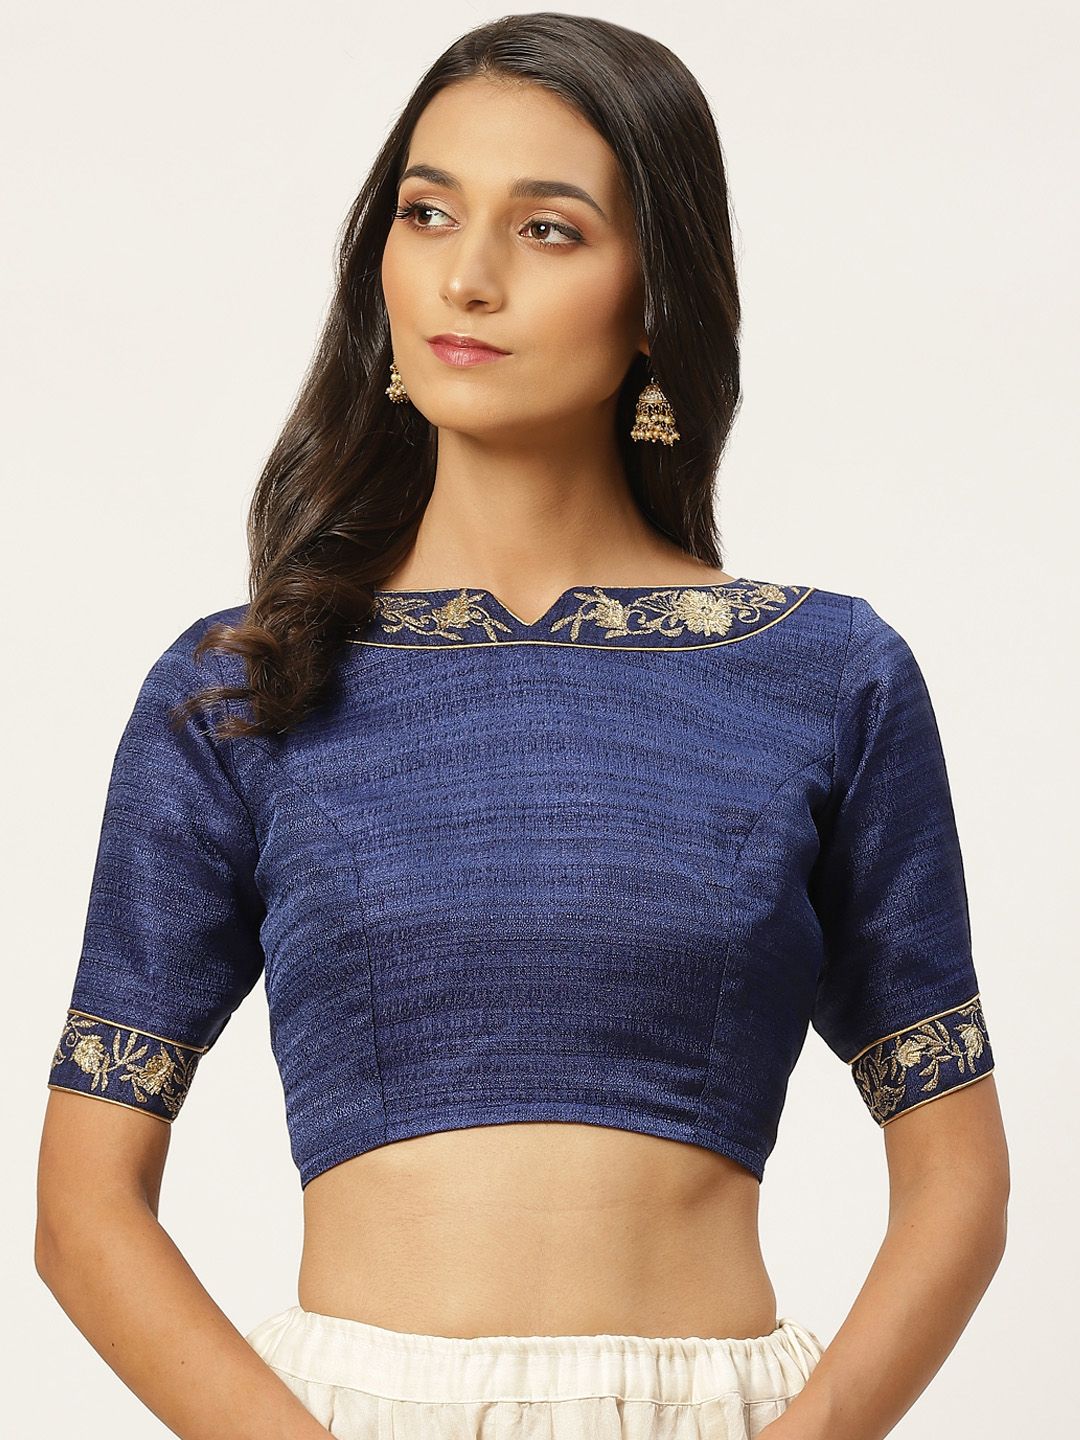 Studio Shringaar Women Navy Blue & Golden Solid Blouse With Embroidered Detail Price in India